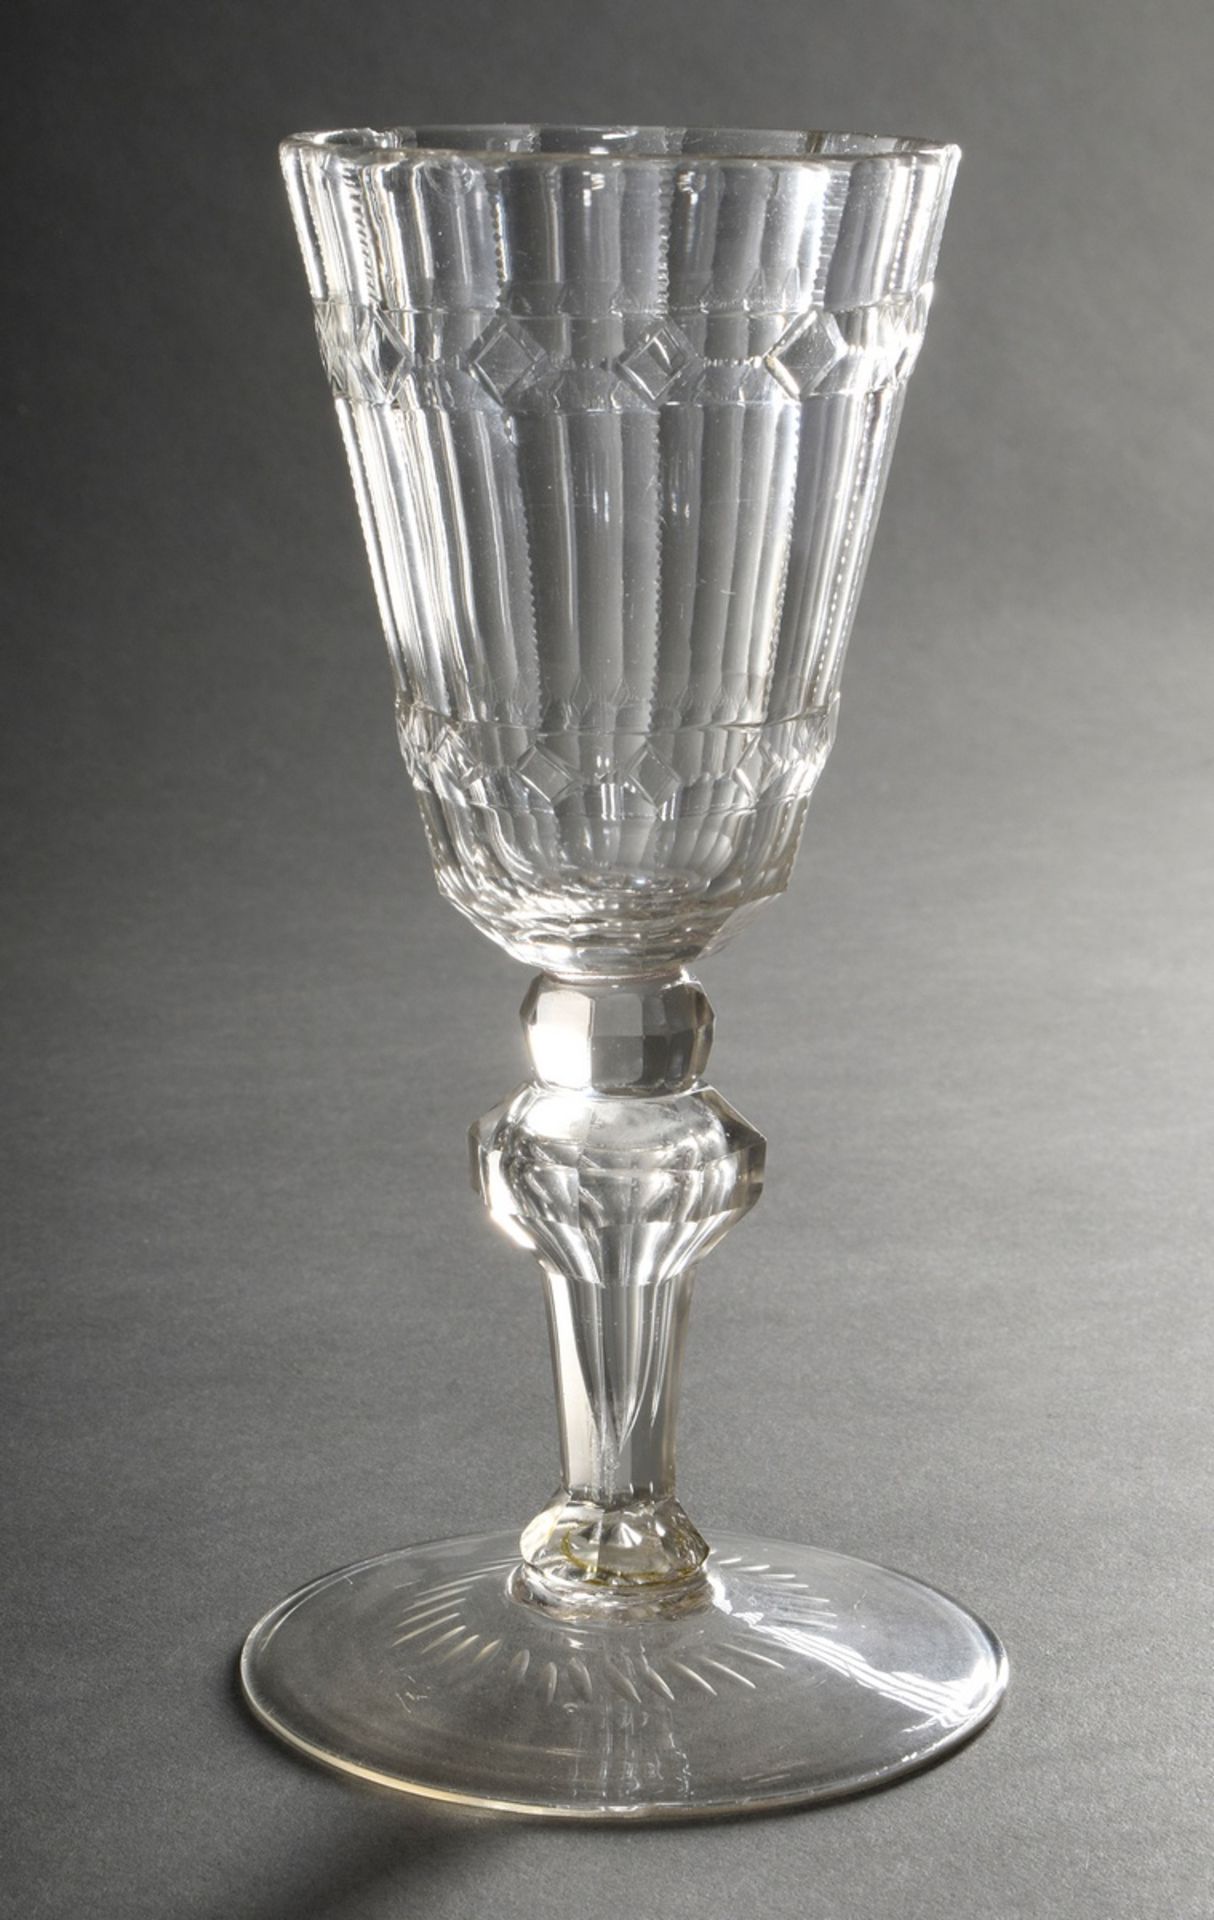 Baroque goblet glass on a broad plate base with baluster stem, pierced air bubble and rich facetted